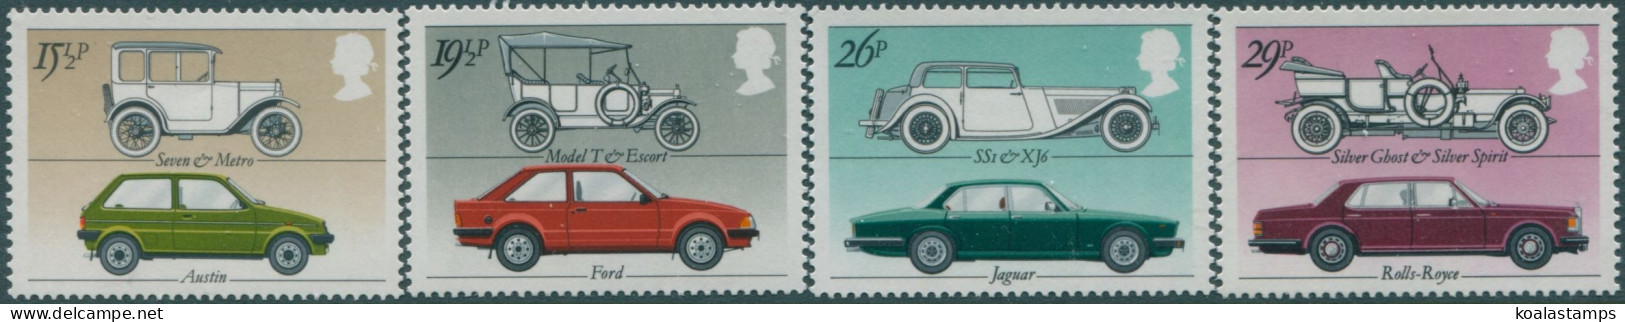 Great Britain 1982 SG1198-1201 QEII Motor Cars Set MNH - Unclassified